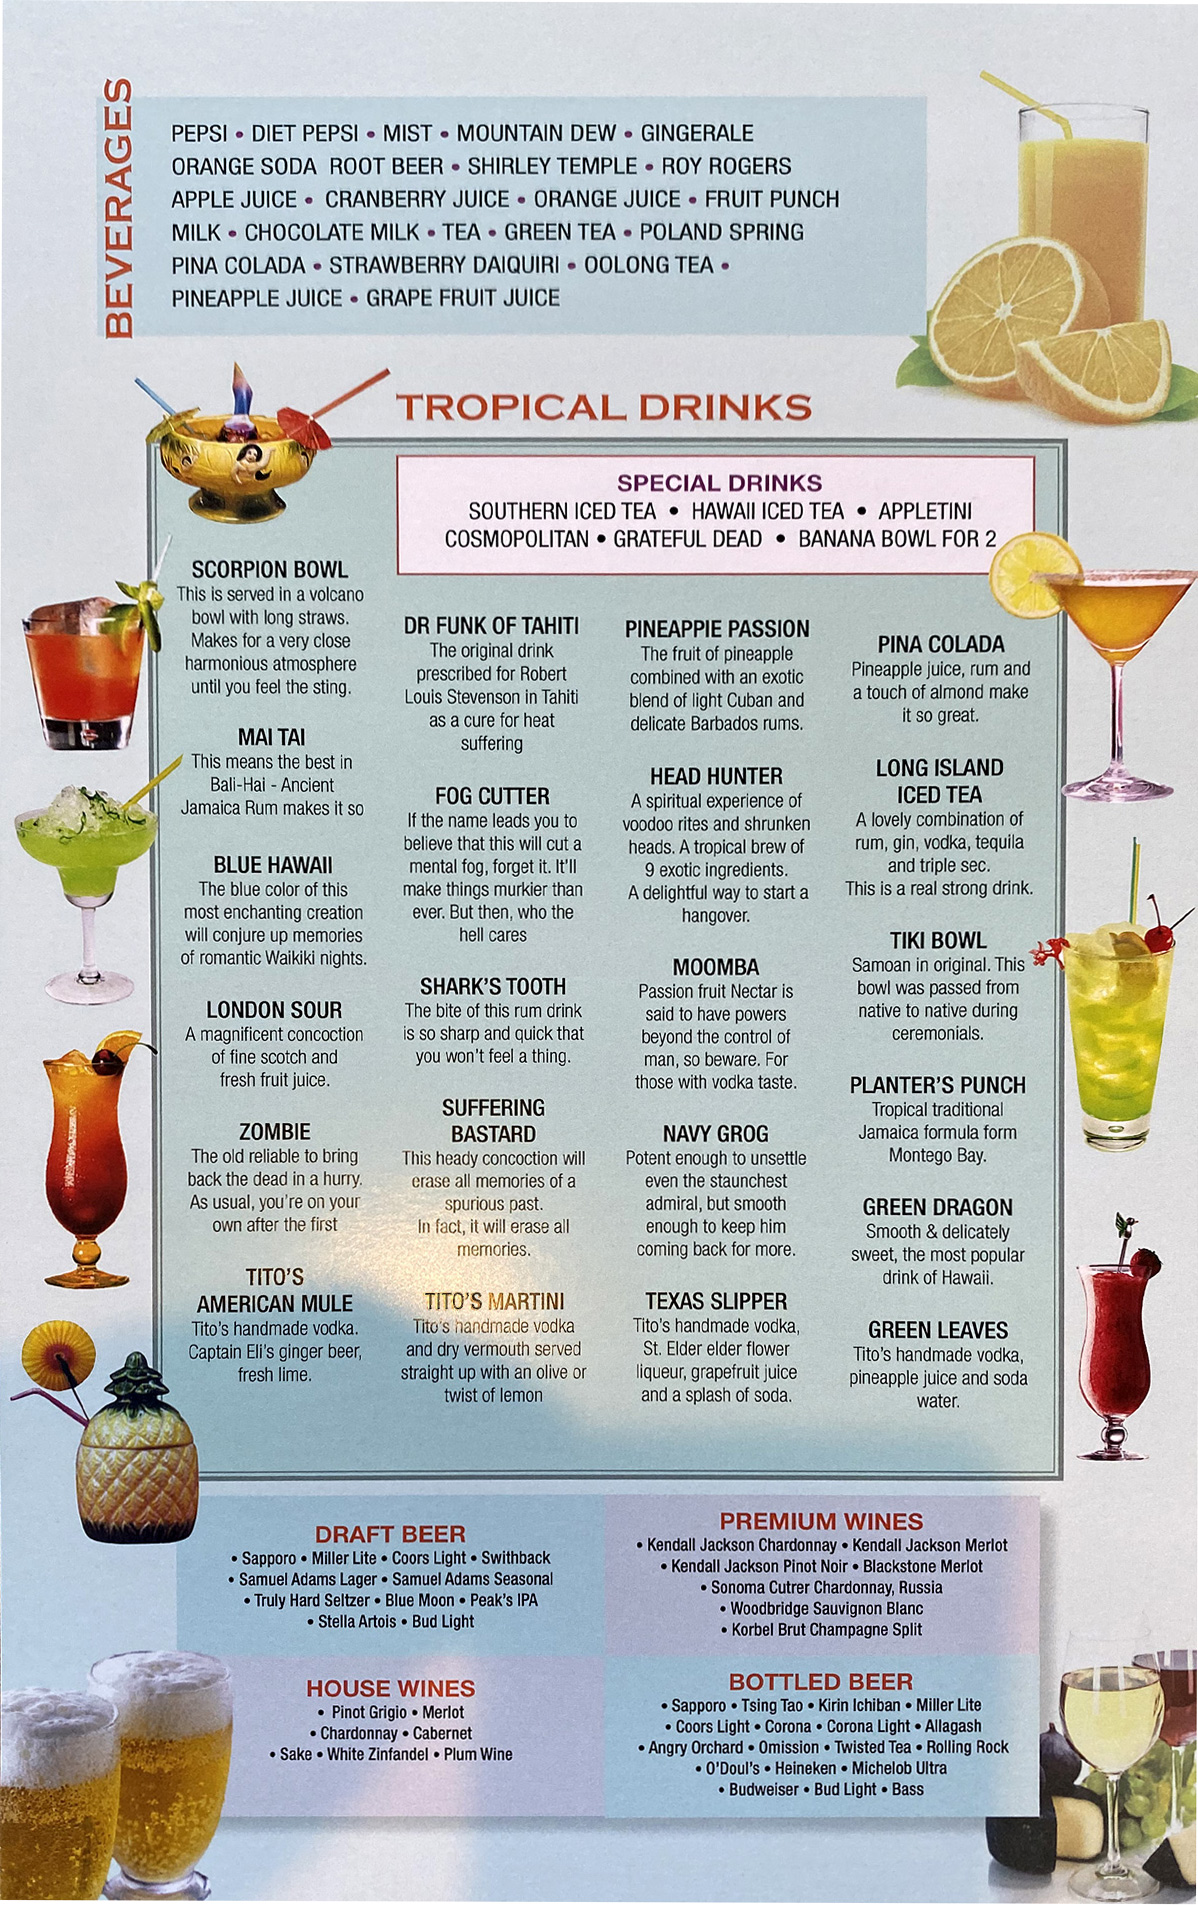 Beverages and Tropical Drinks